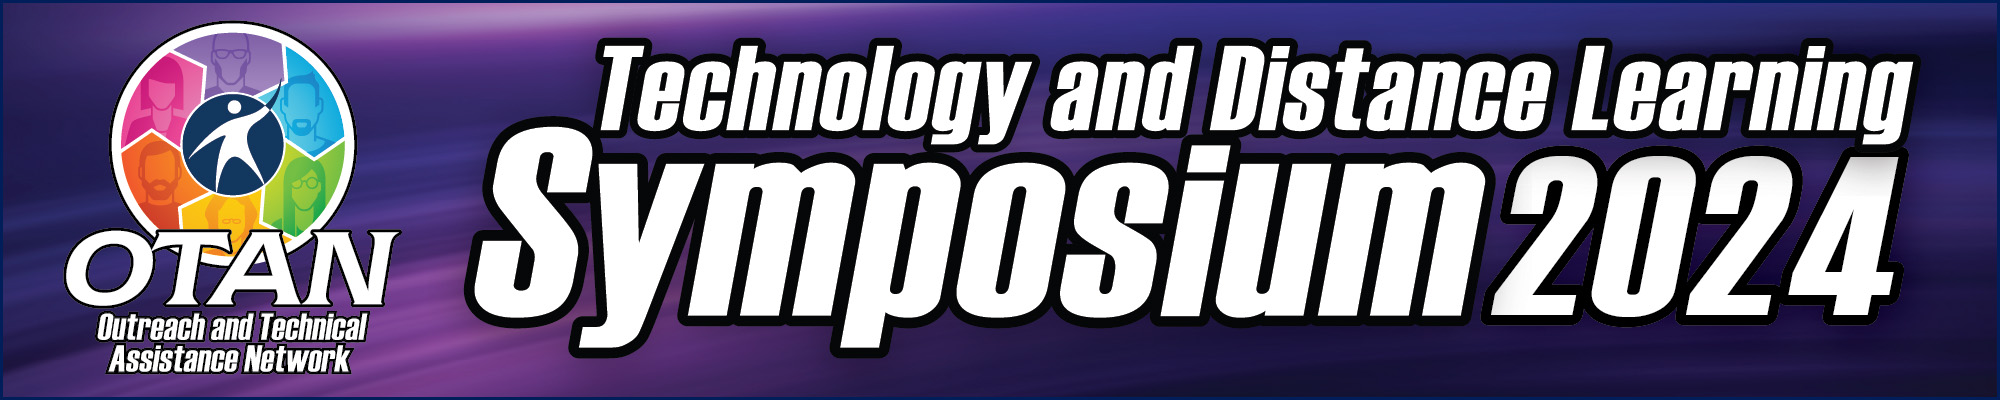 Technology and Distance Learning Symposium banner